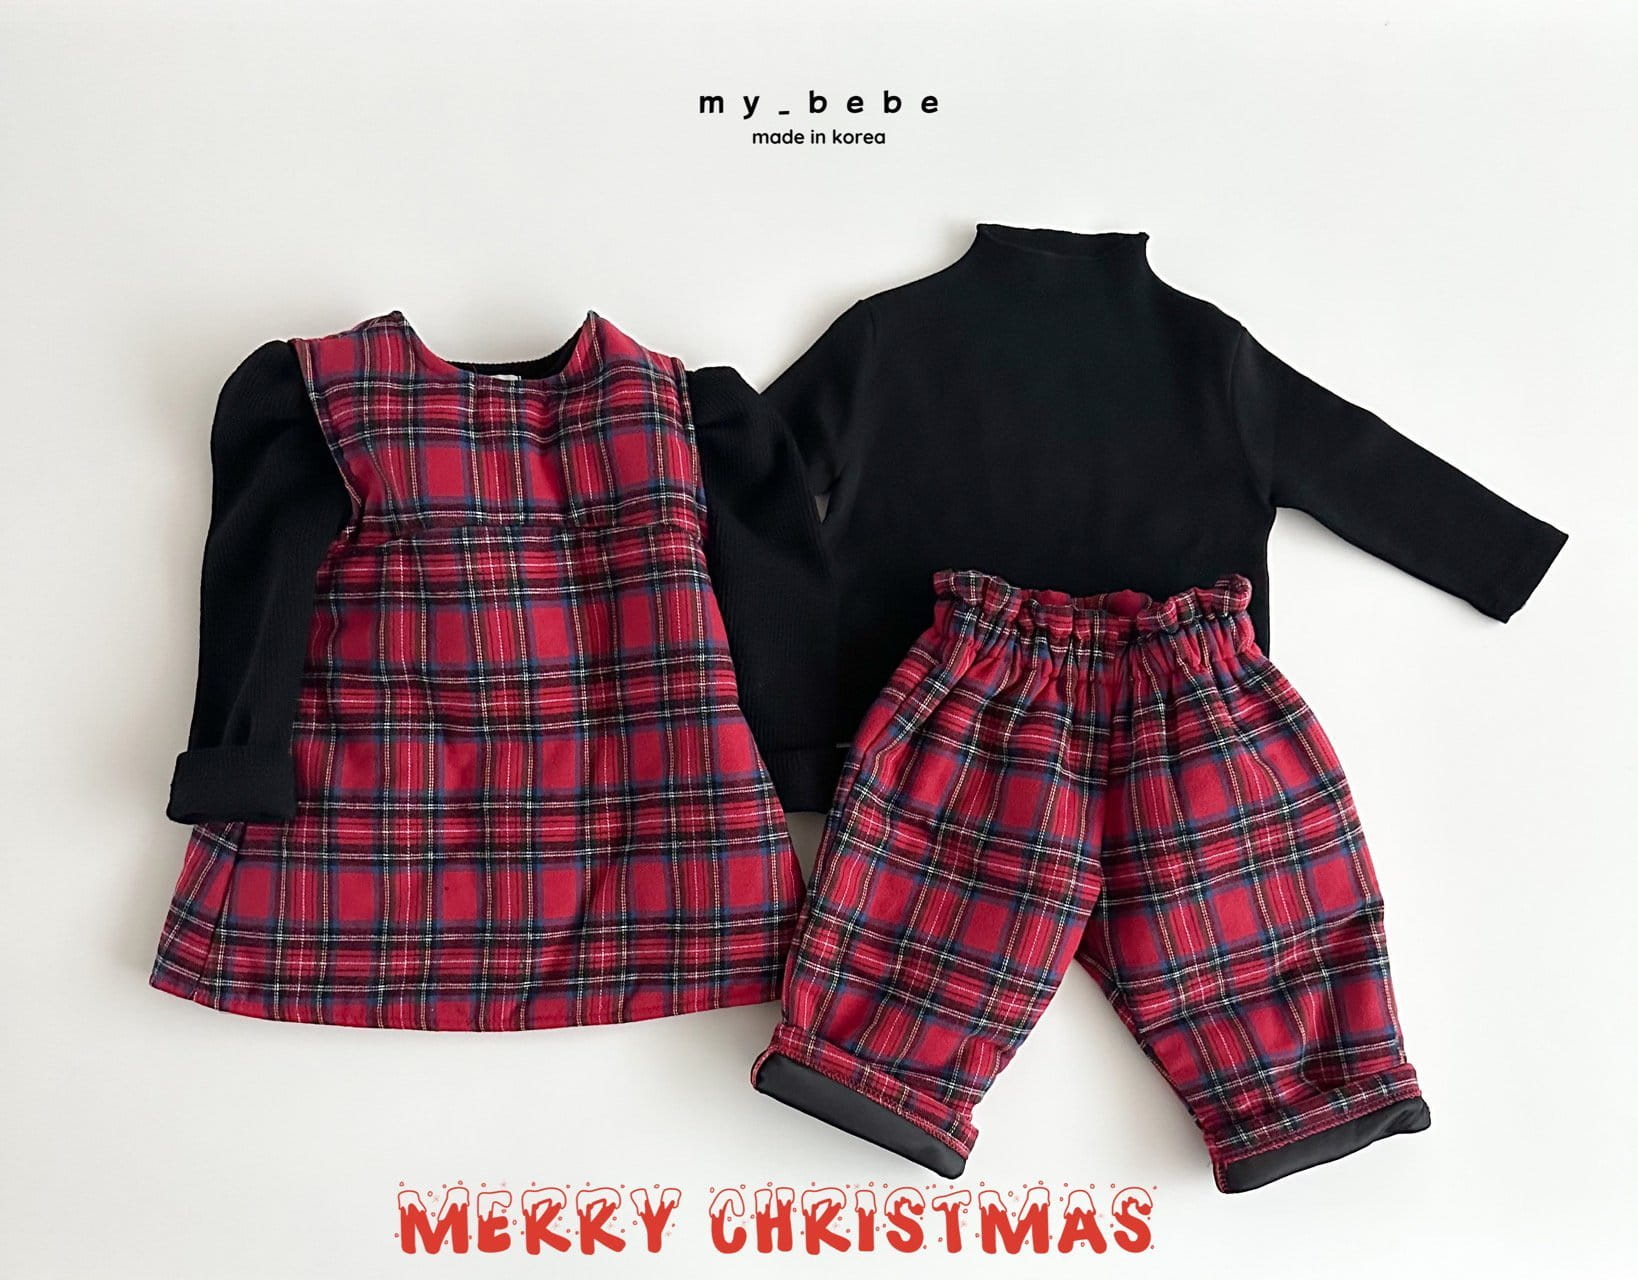 My Bebe - Korean Baby Fashion - #babyootd - The End Of Year One-Piece - 5